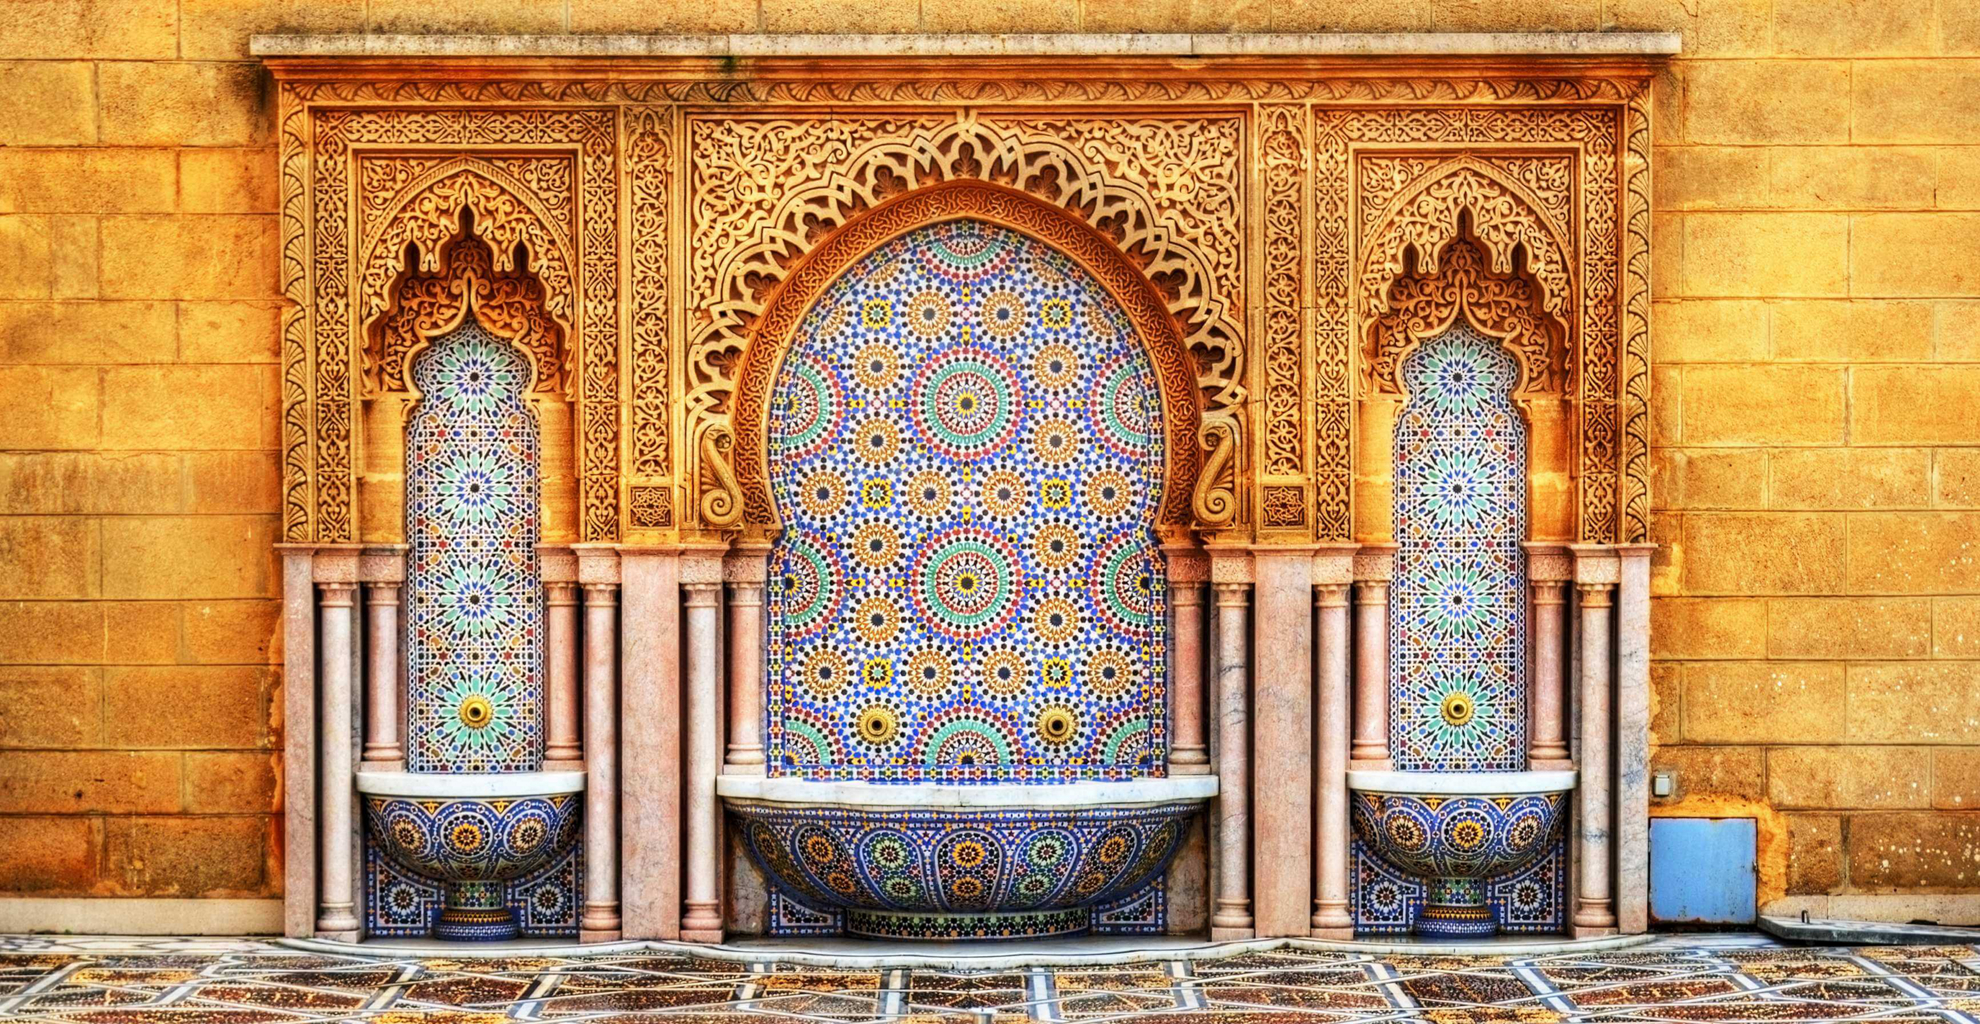 Rabat attractions: a brightly coloured mosaic wall with fountains